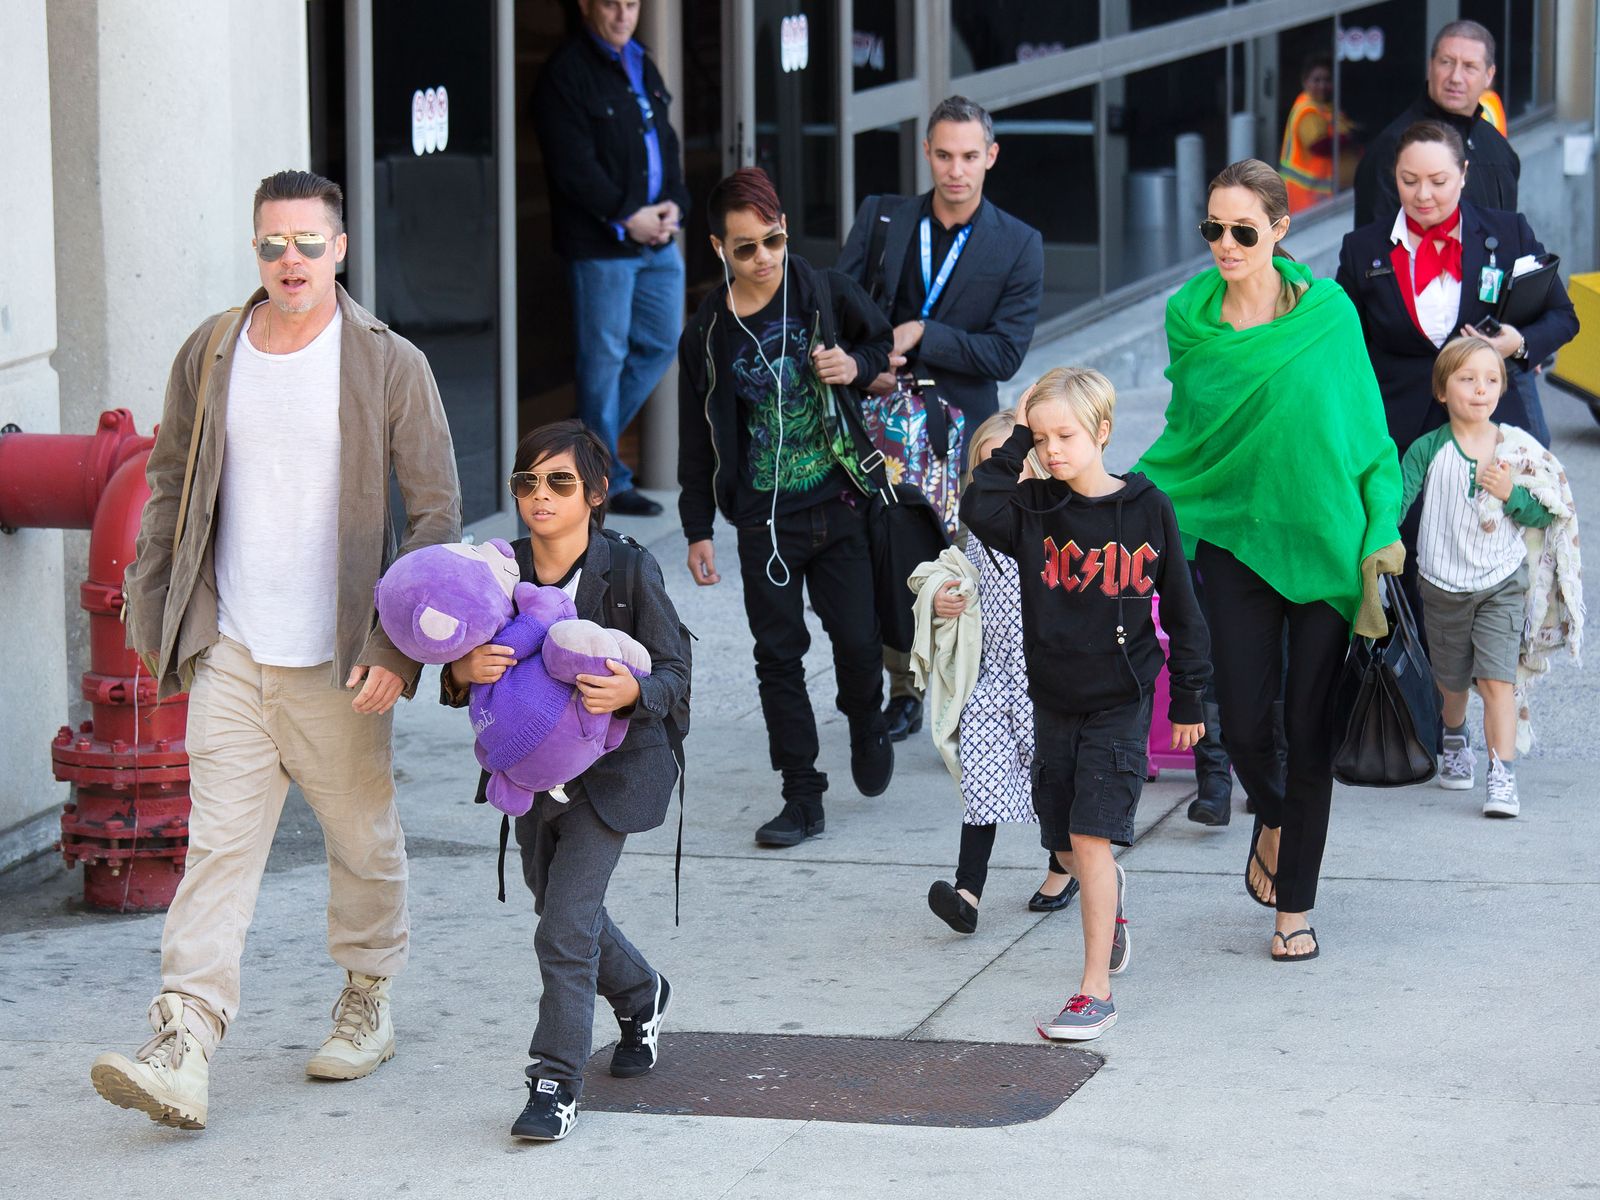 Brad Pitt and Angelina Jolie at Los Angeles International Airport with their children, Pax, Maddox, Shiloh, Vivienne, and Knox Jolie-Pitt on February 5, 2014, in California. | Source: GVK/Bauer-Griffin/GC Images/Getty Images